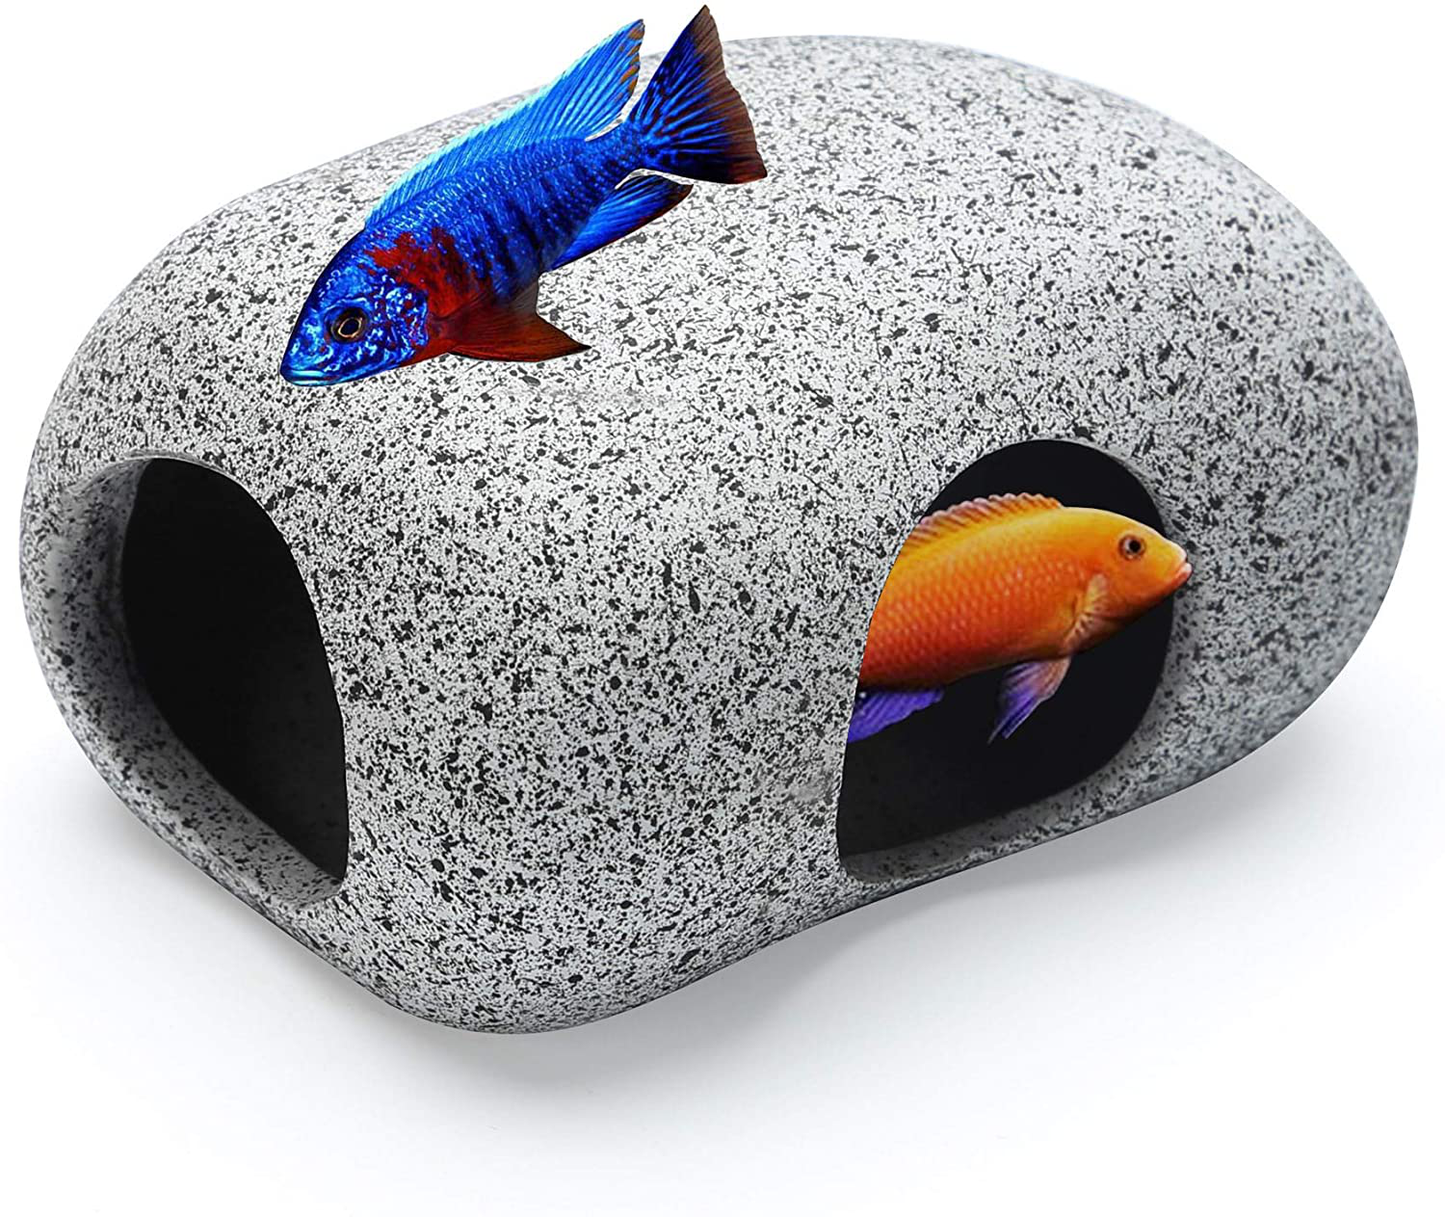 Spingsmart Aquarium Hideaway Rocks for Aquatic Pets to Breed, Play and Rest, Safe and Non-Toxic Fish Tank Ornaments, Ceramic Decor Rocks for Aquascape Animals & Pet Supplies > Pet Supplies > Fish Supplies > Aquarium Decor SpringSmart 3.7"x2.7"x2"(1pc)  